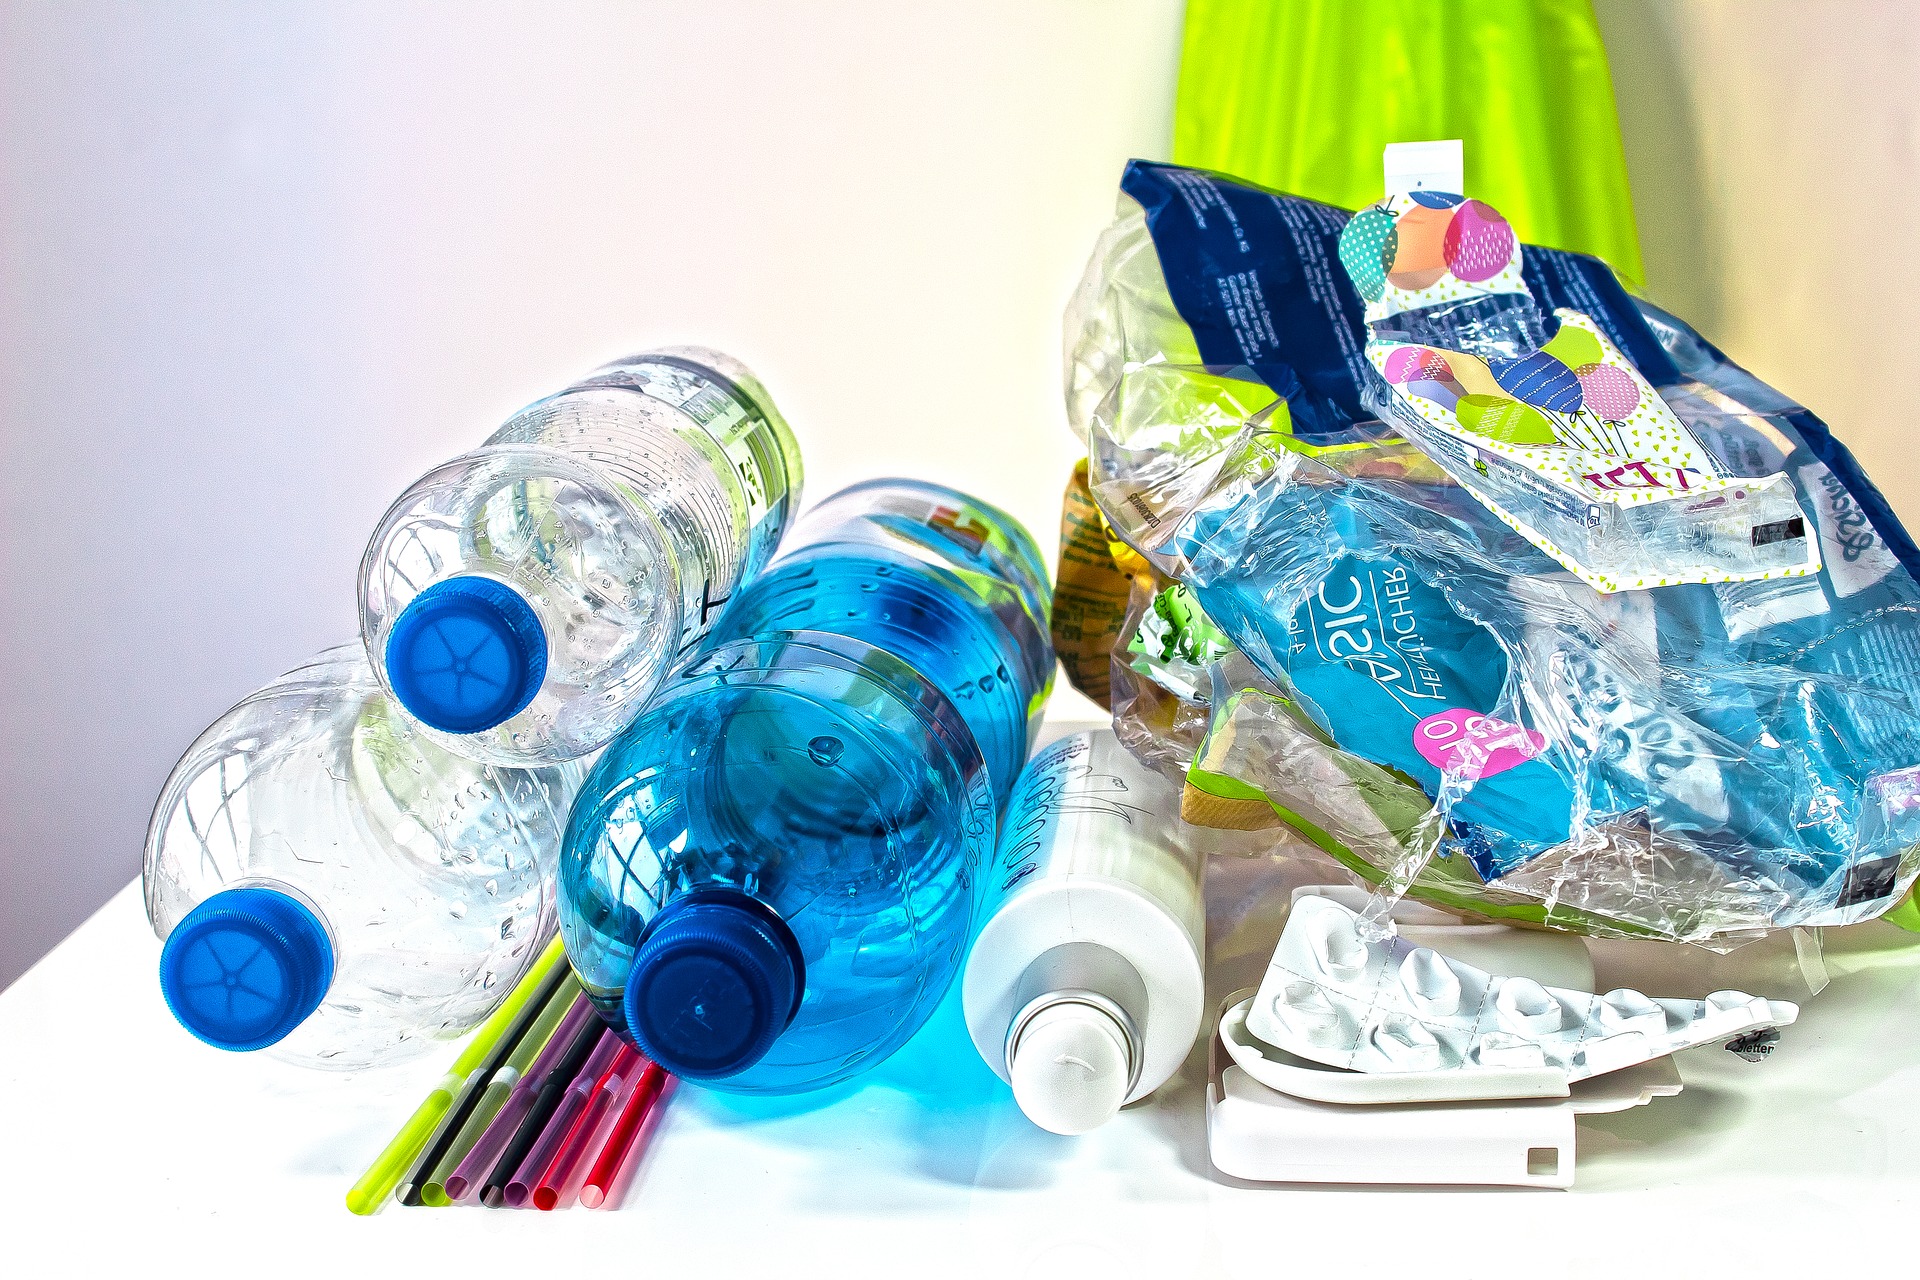 UK Plastics Pact and other reporting deadlines coming soon